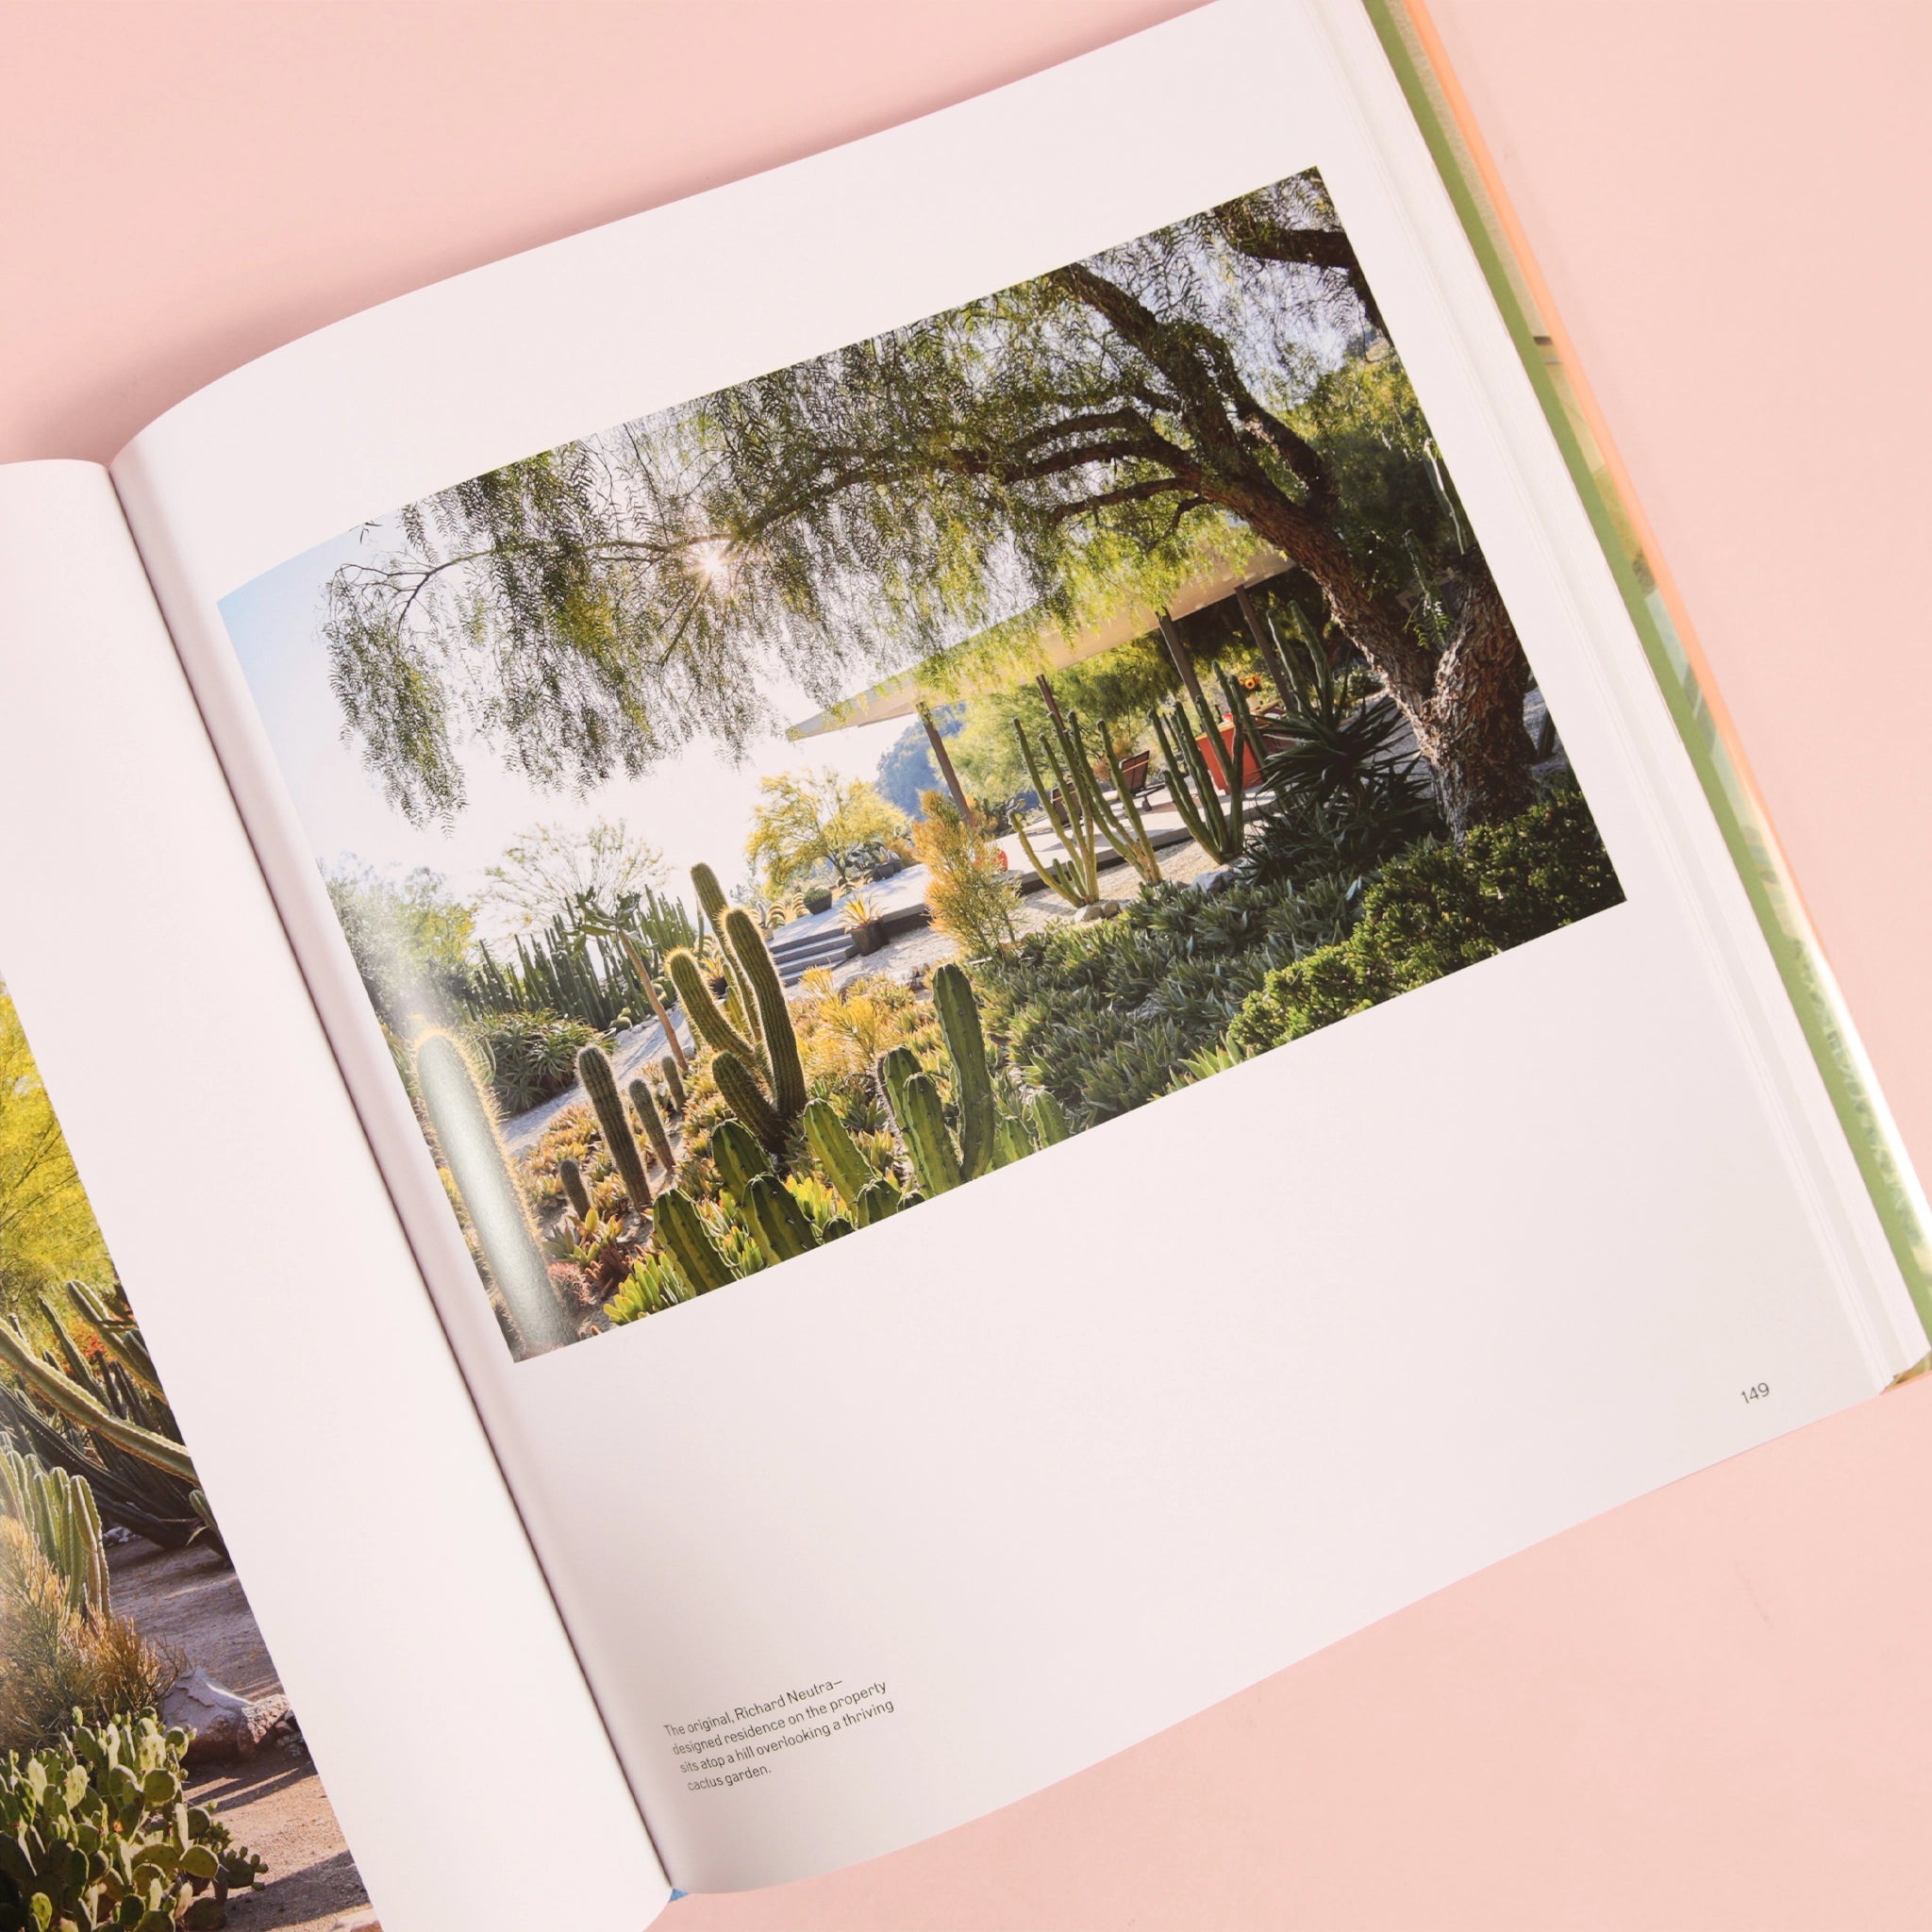 On a pink background is the book open to a photograph of a home with cacti and nature all around it. 